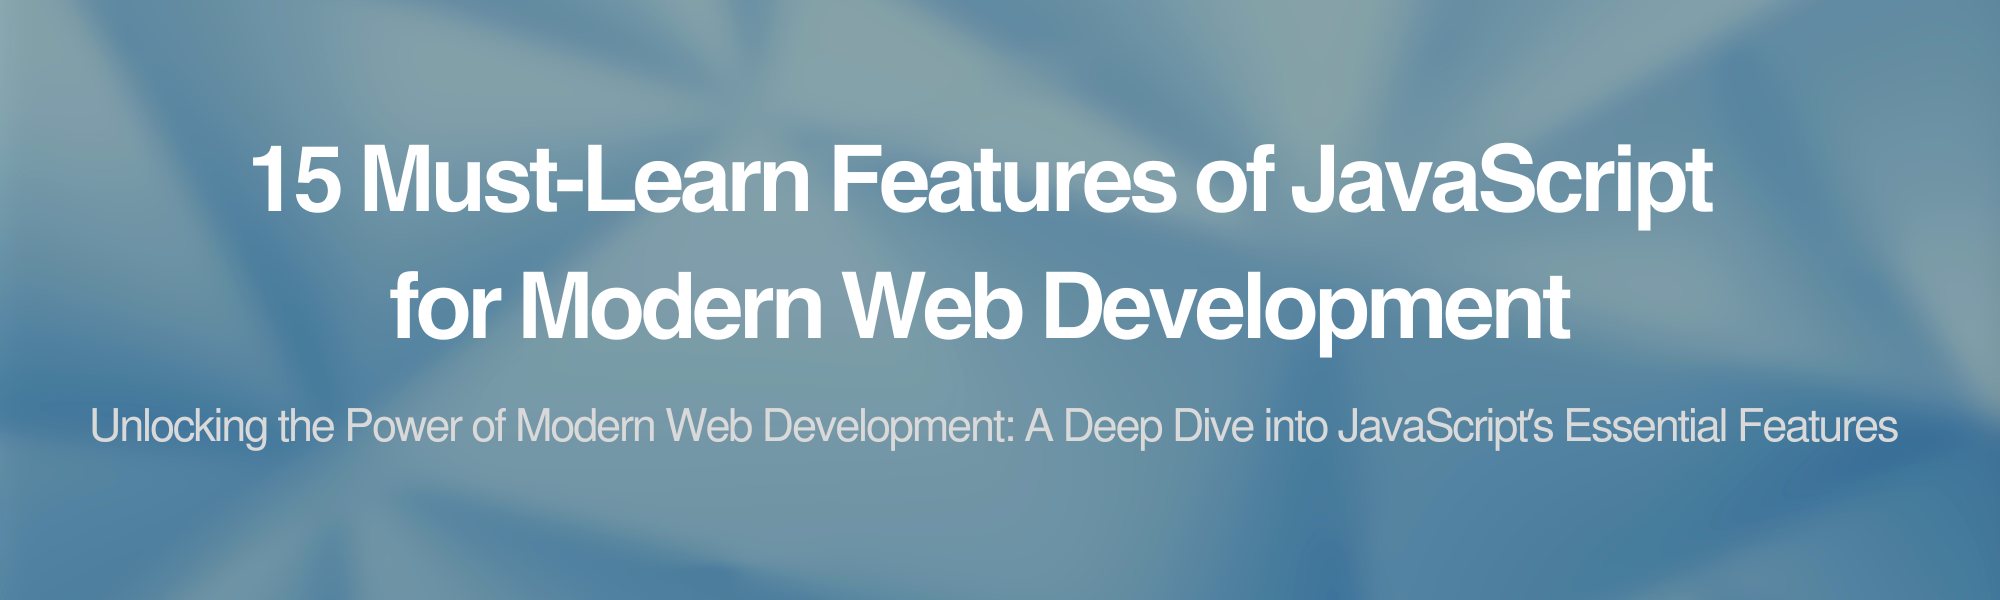 The 15 Must-Learn Features of JavaScript for Modern Web Development